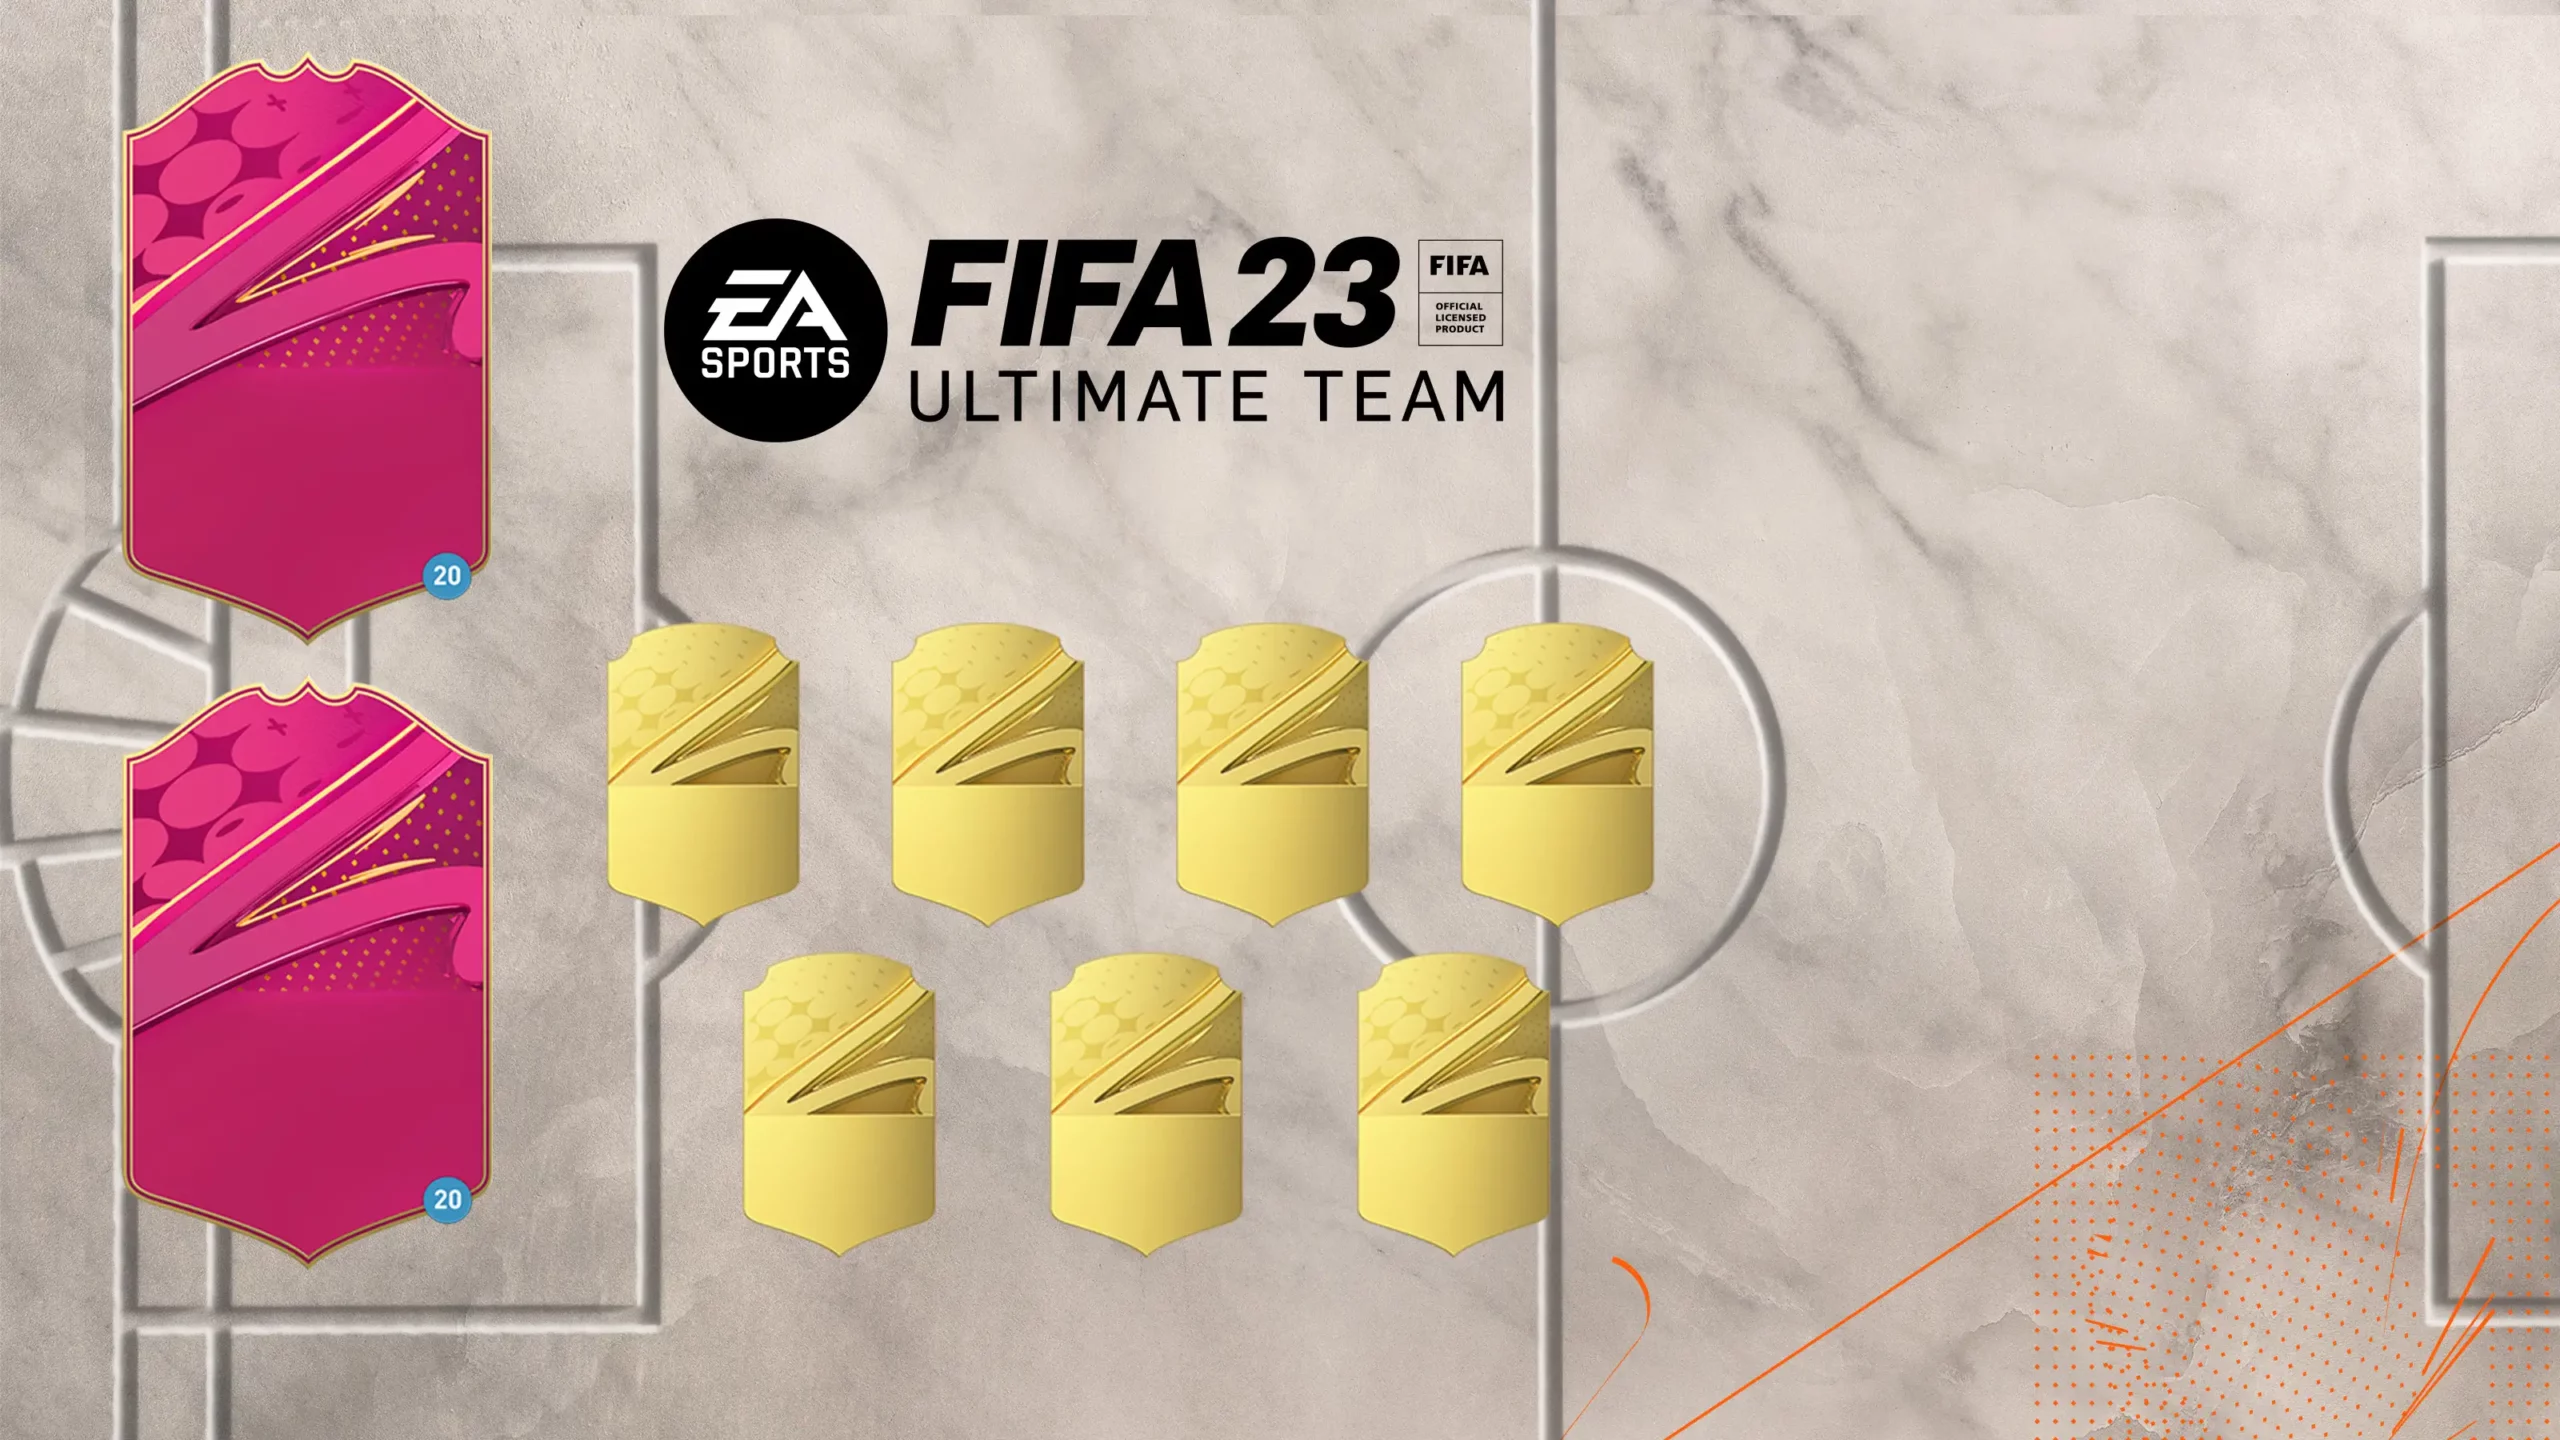 New On FIFA 23 Ultimate Team Pack - Free Prime Gaming Pack #11